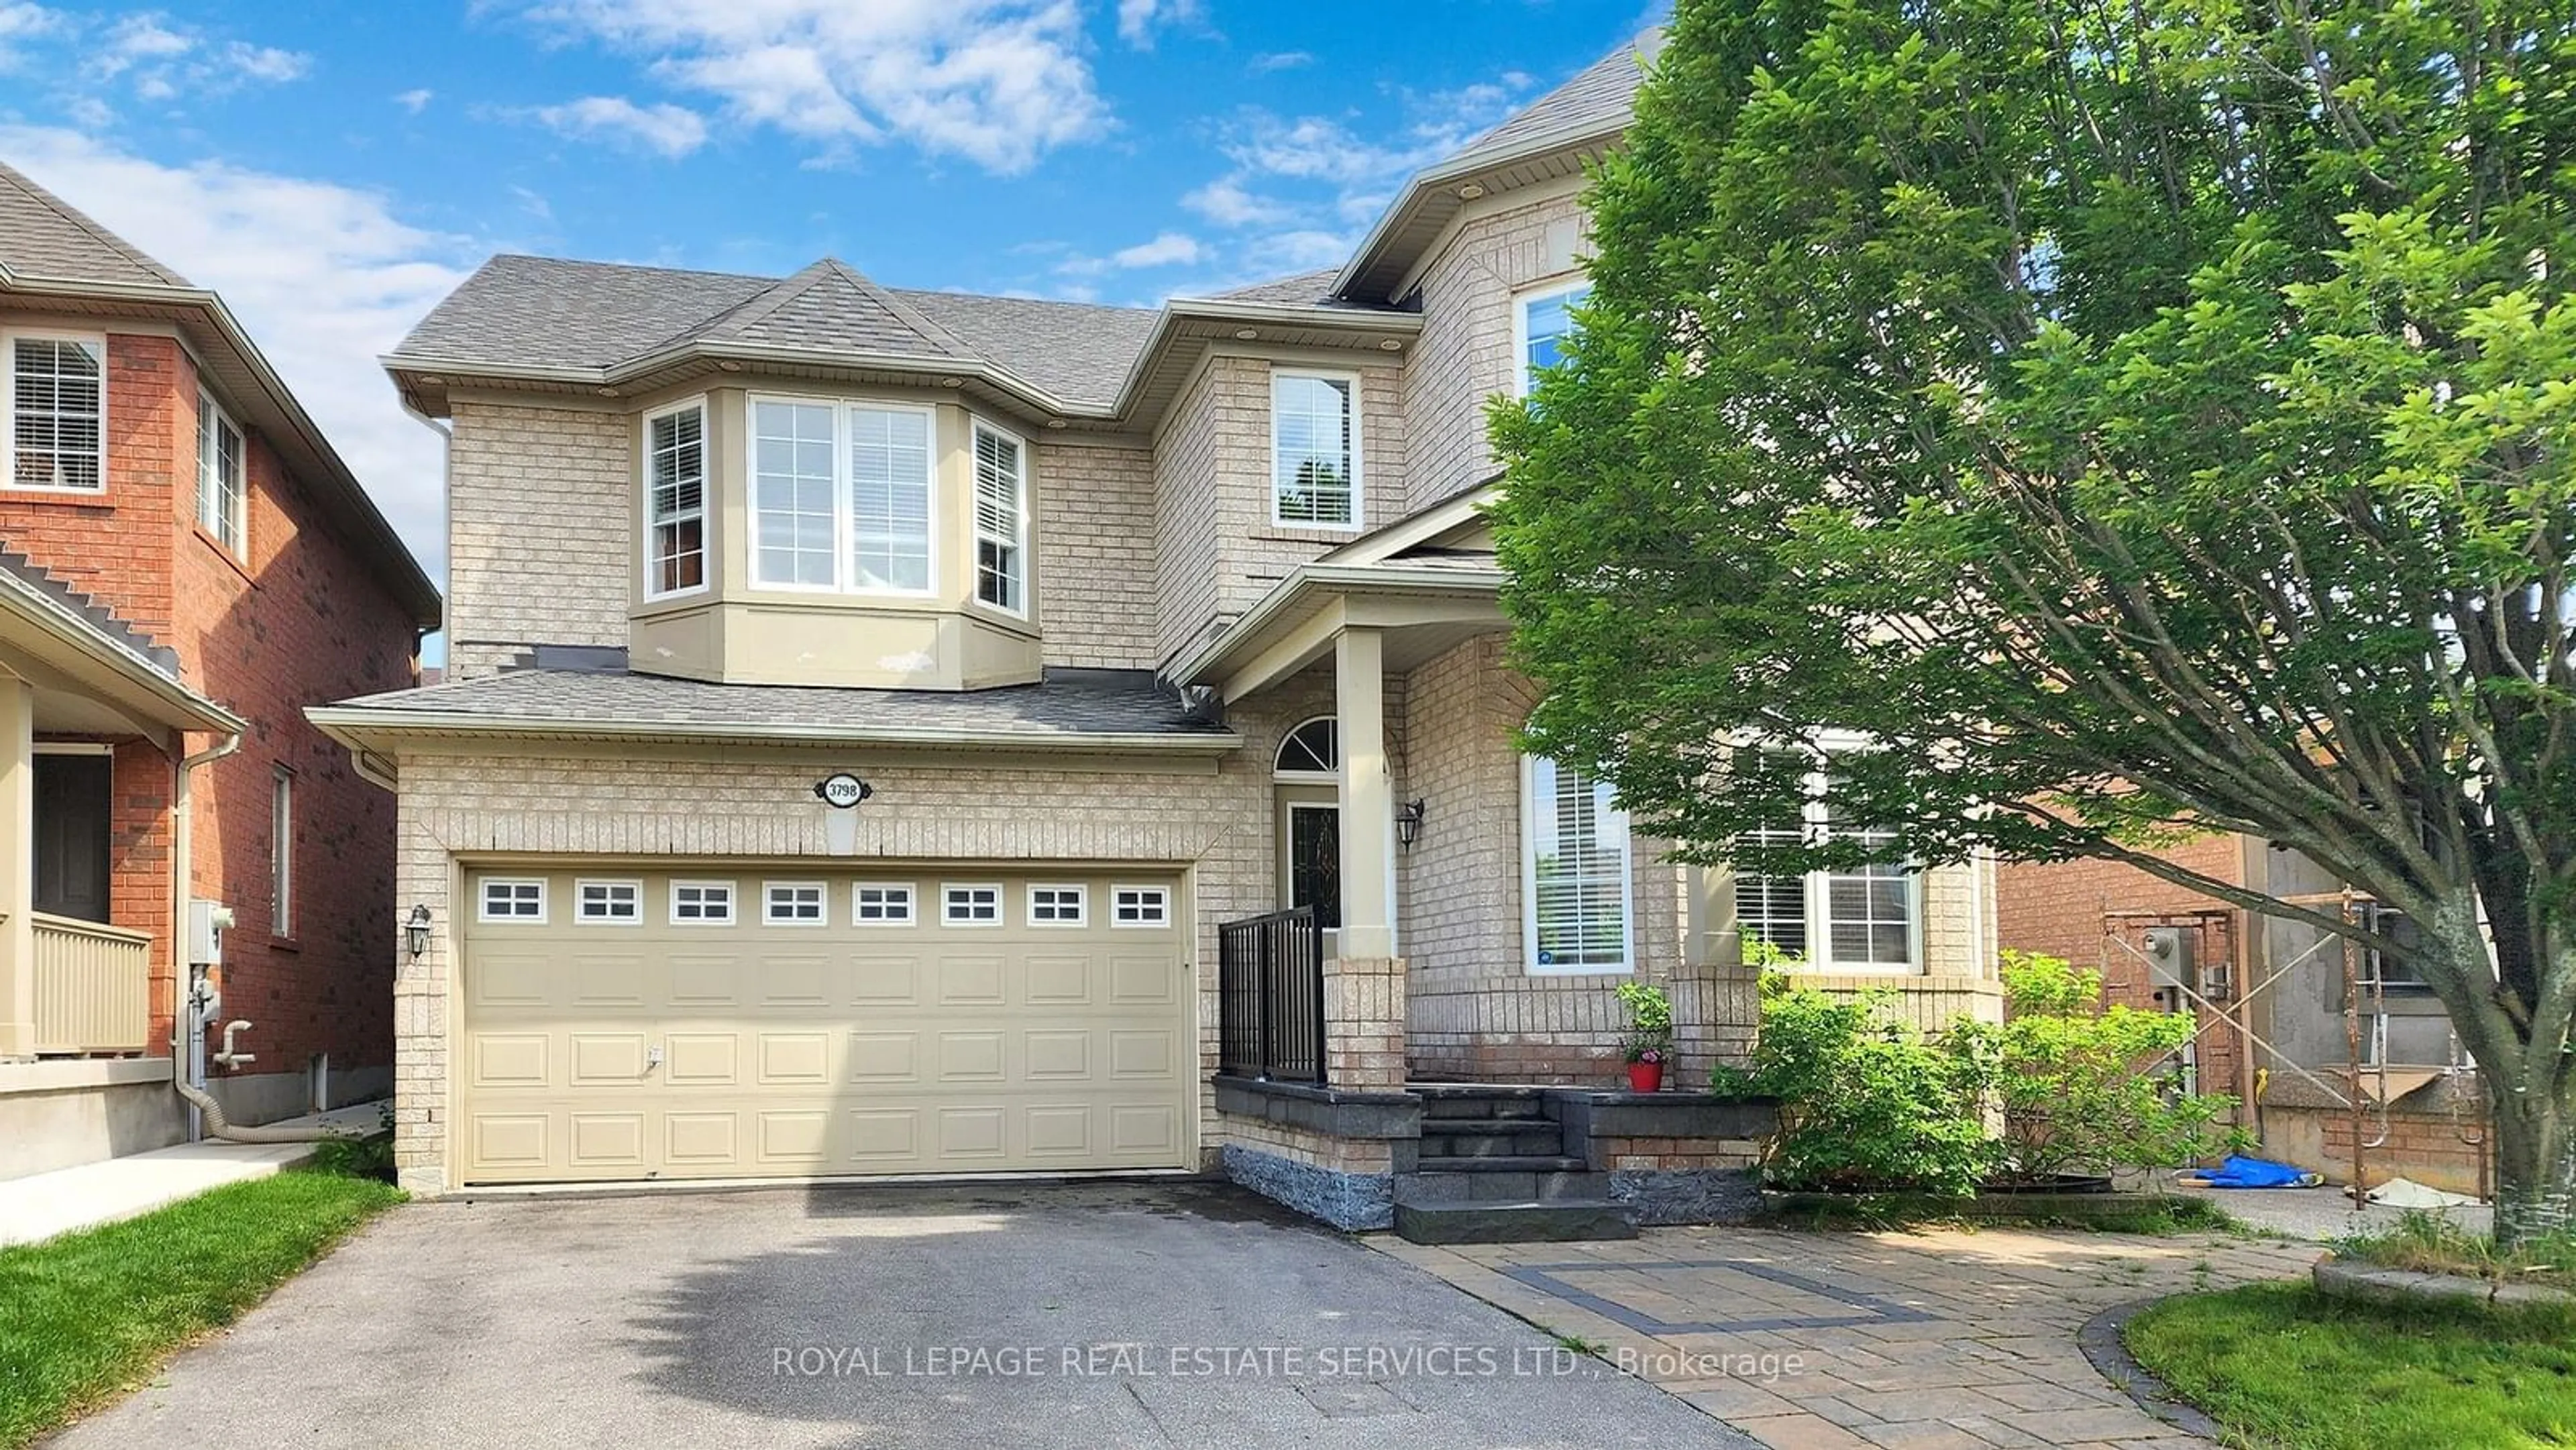 Frontside or backside of a home for 3798 Swiftdale Dr, Mississauga Ontario L5M 6M5